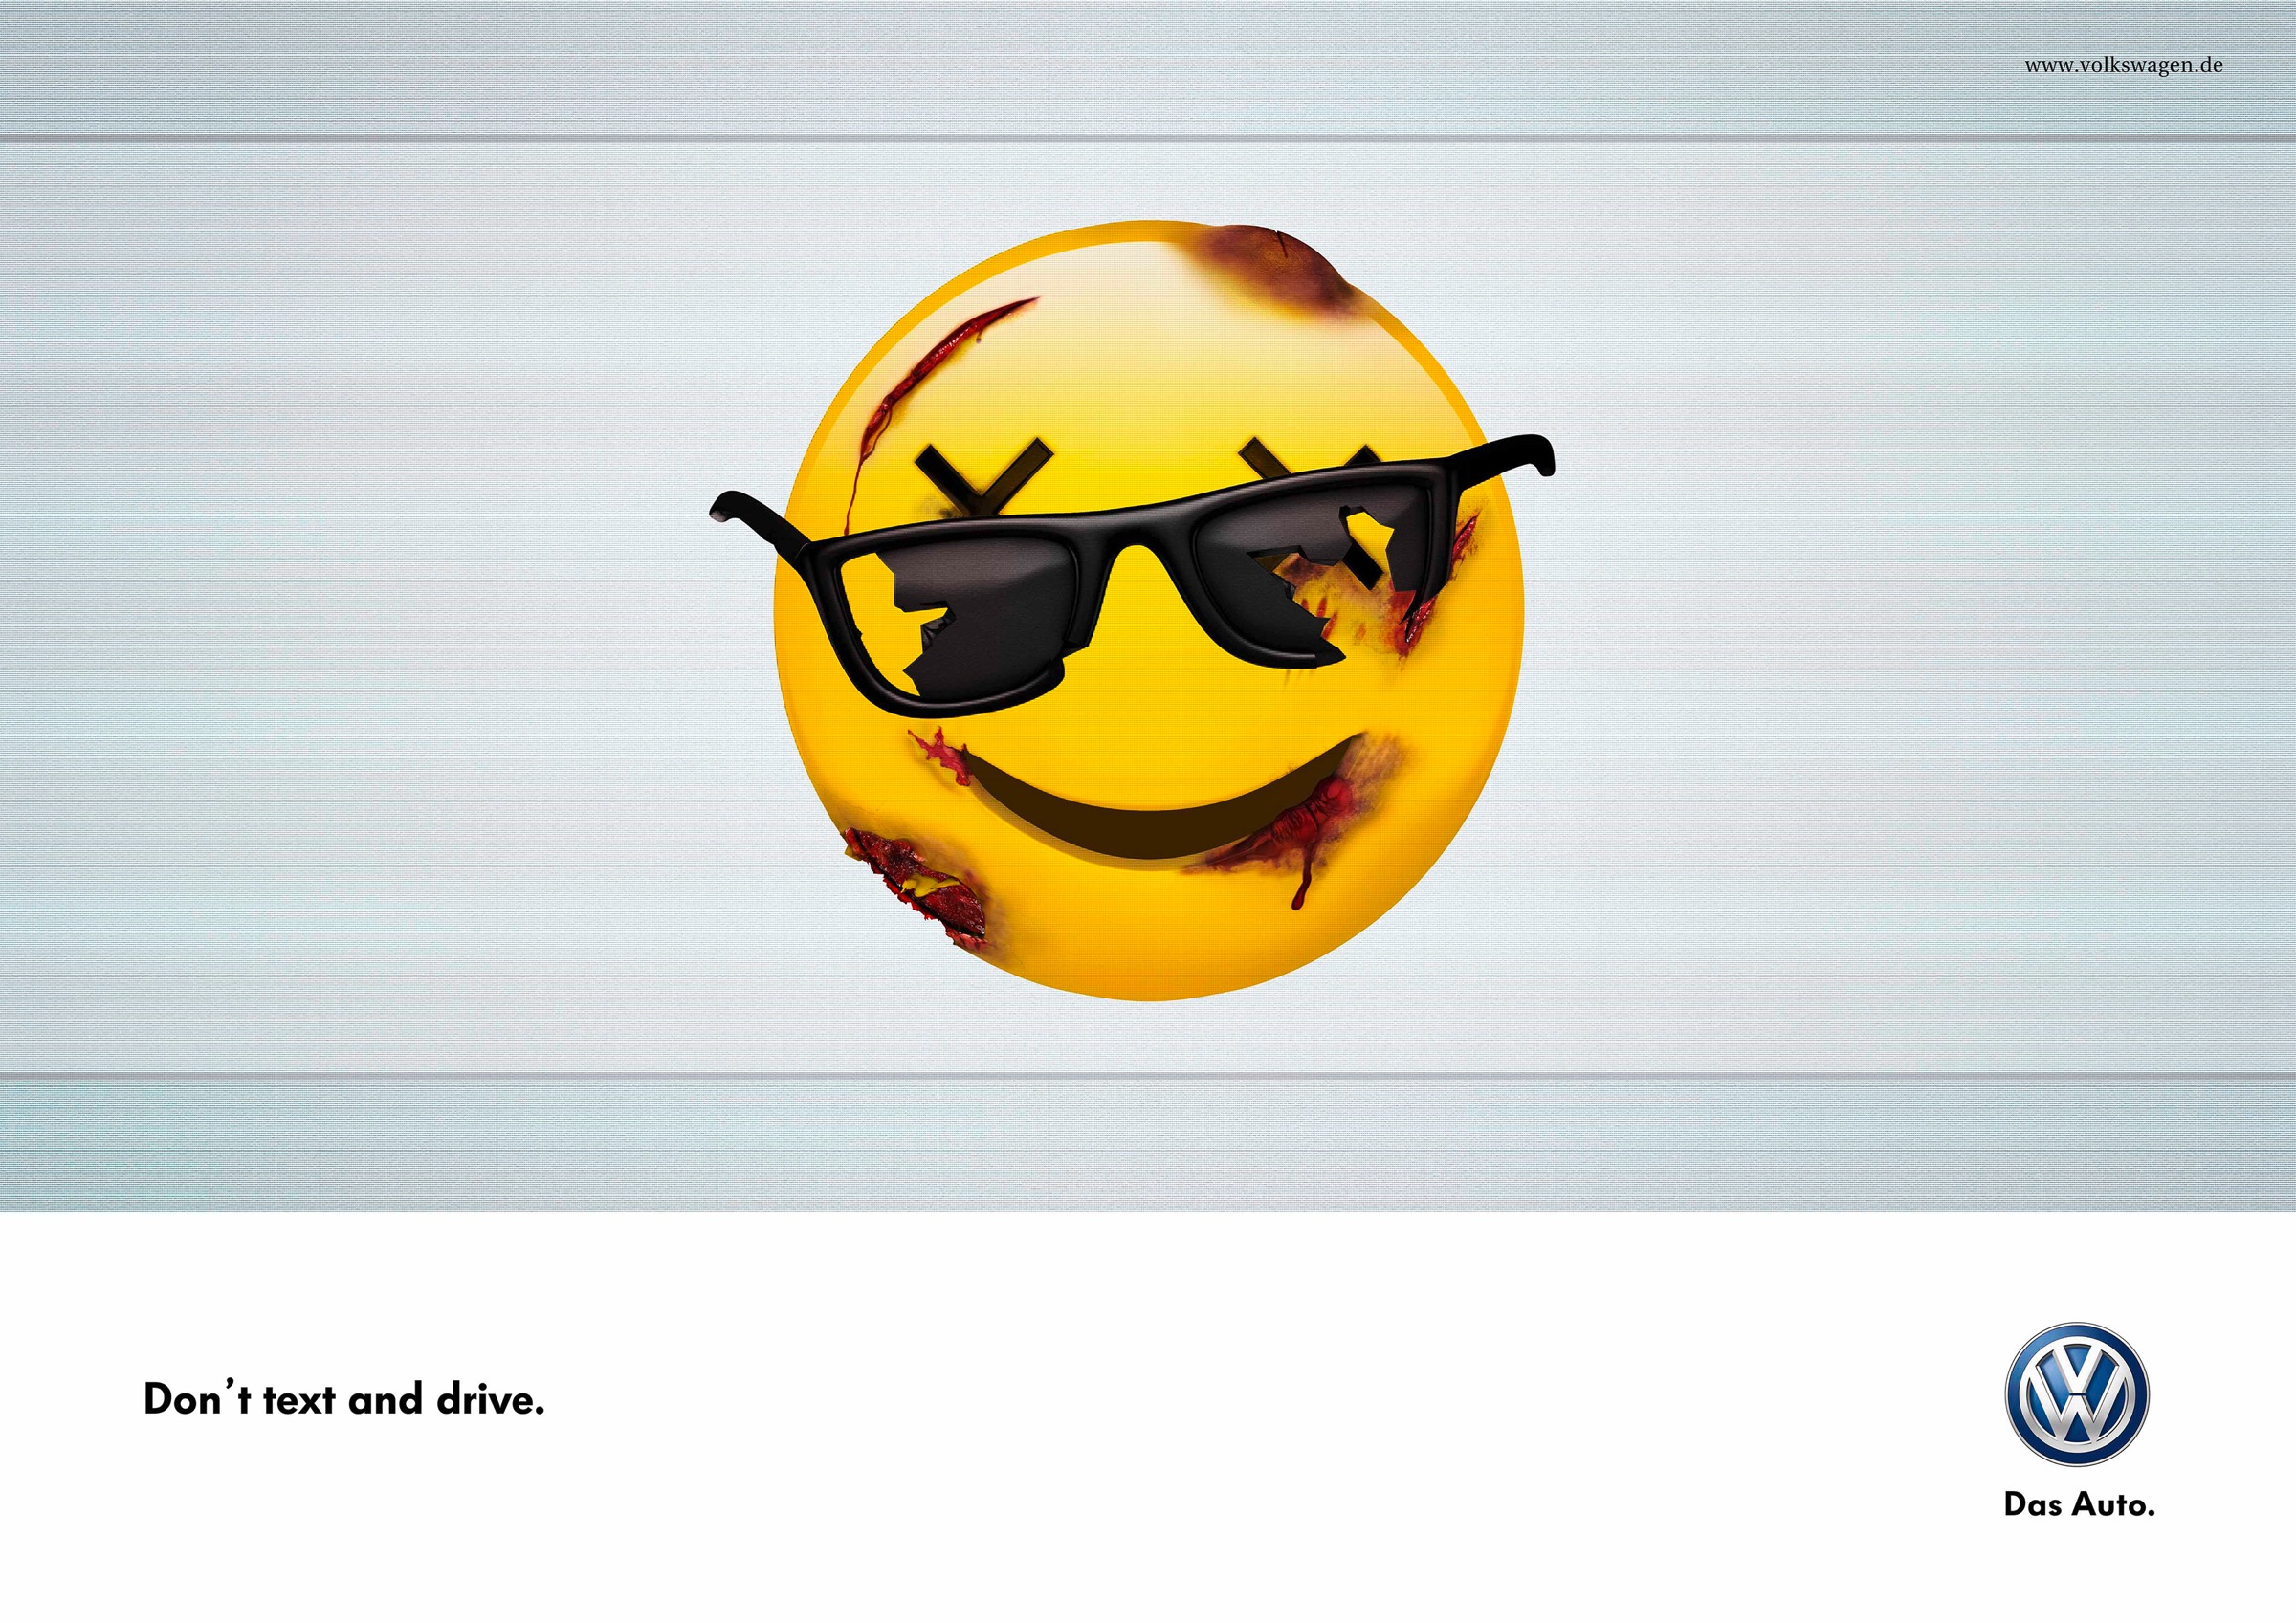 vw_dont_text_and_drive_sunglasses_aotw